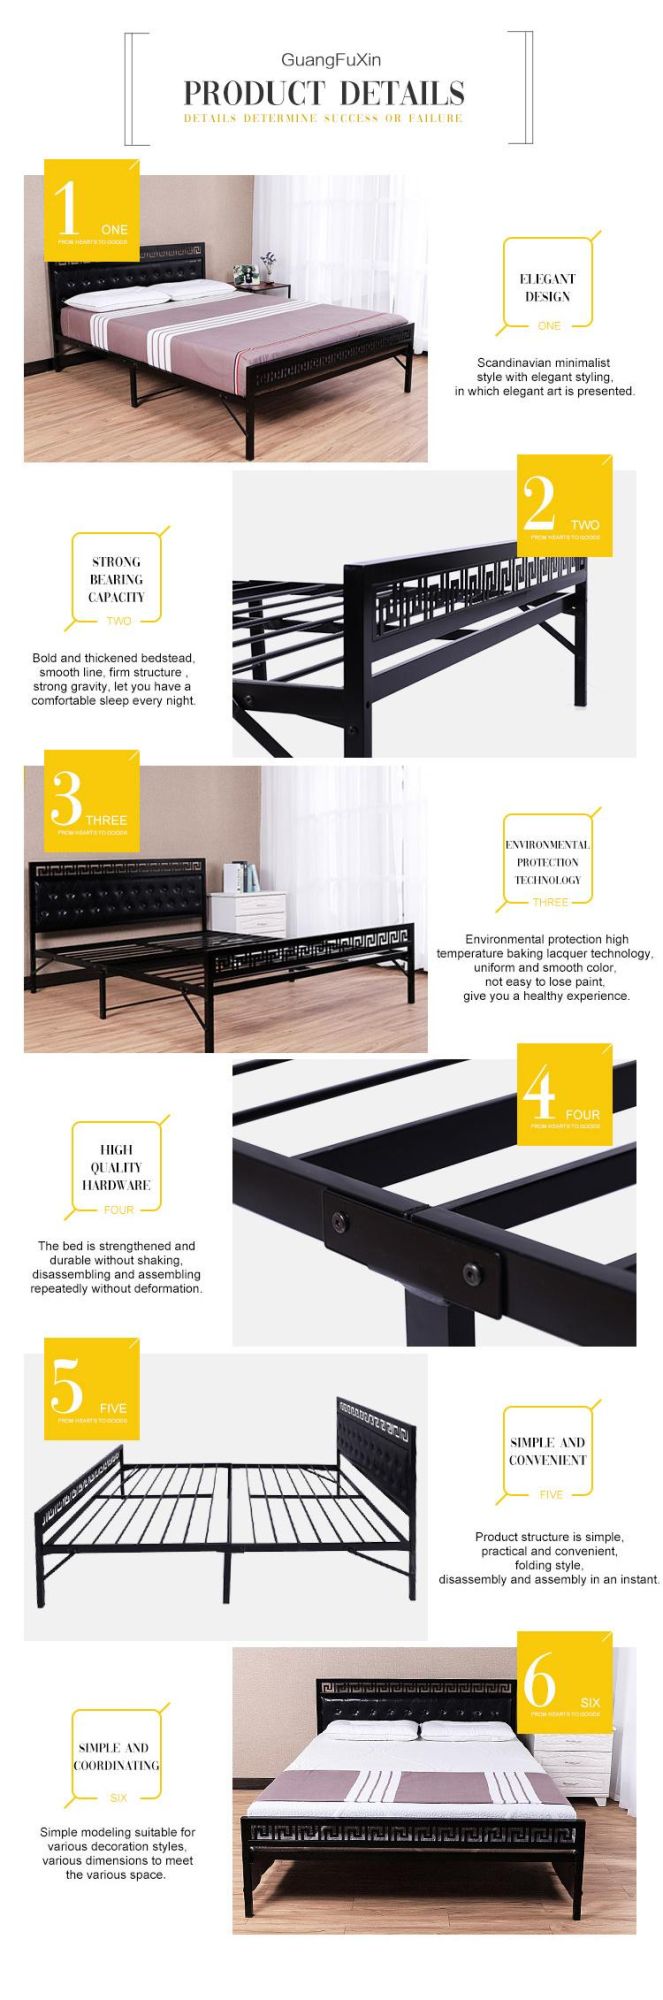 Skilful Manufacture Queen Size Iron Bed Frame